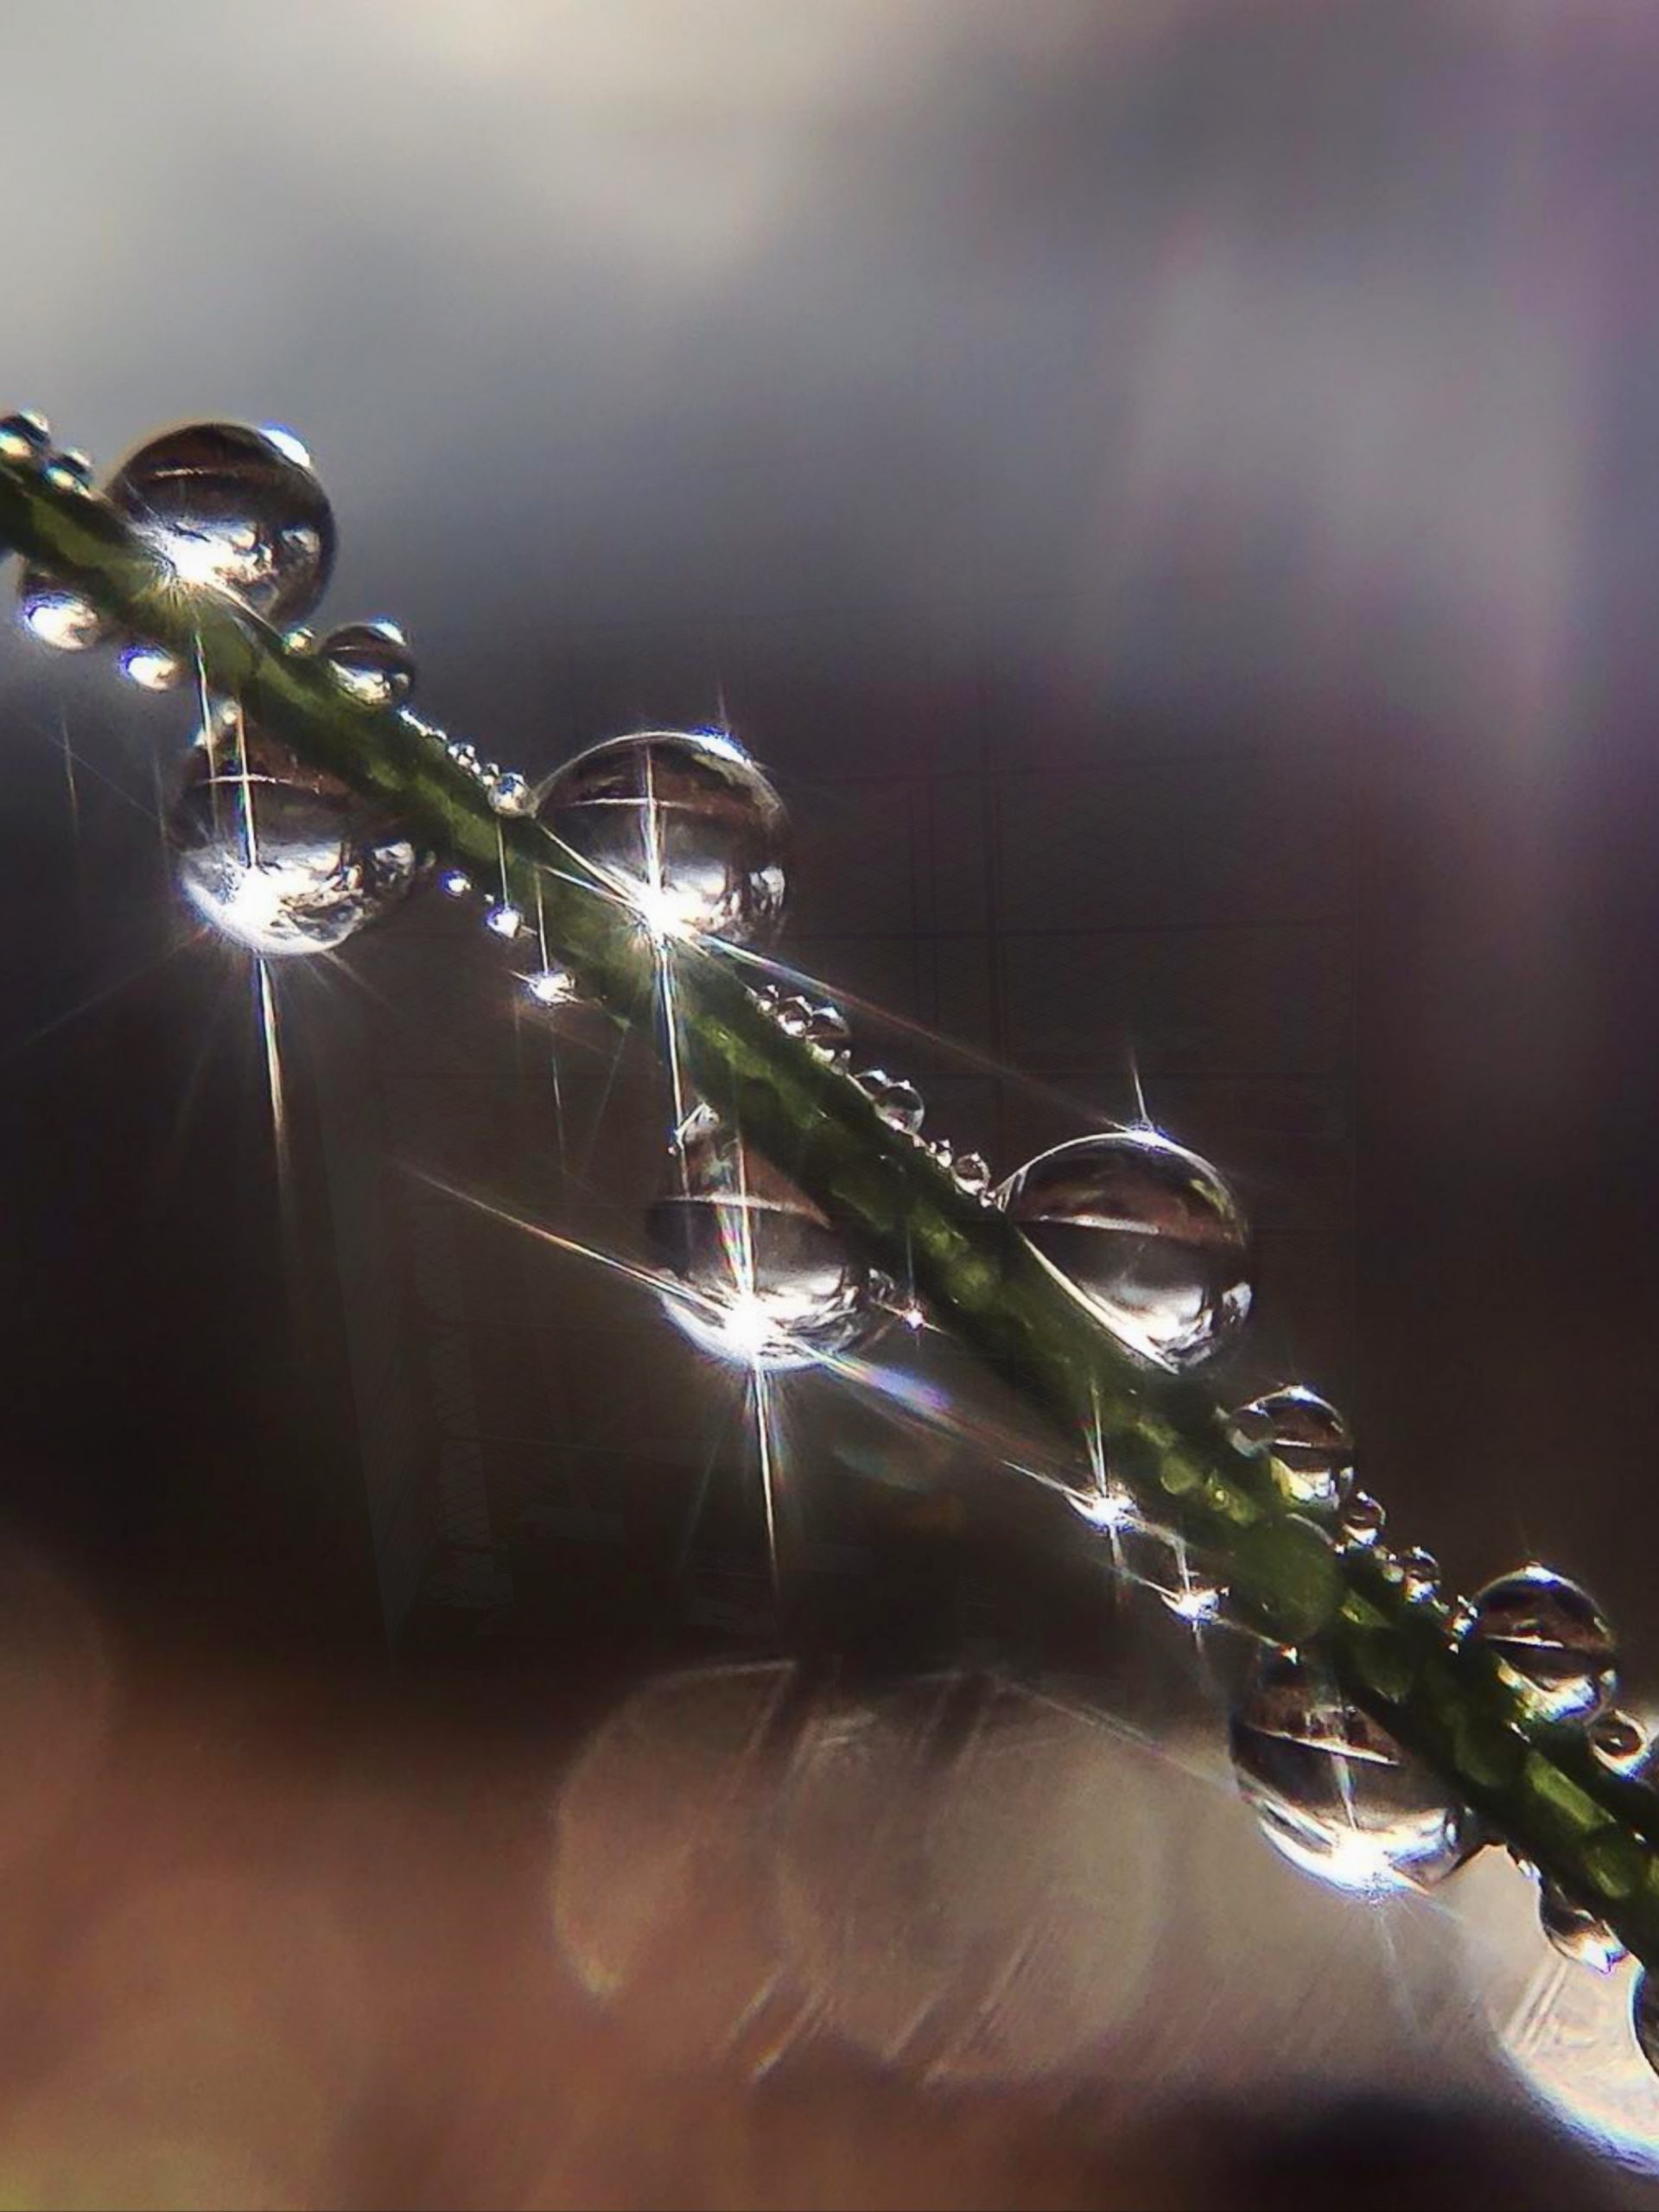 waterdrops on a stem